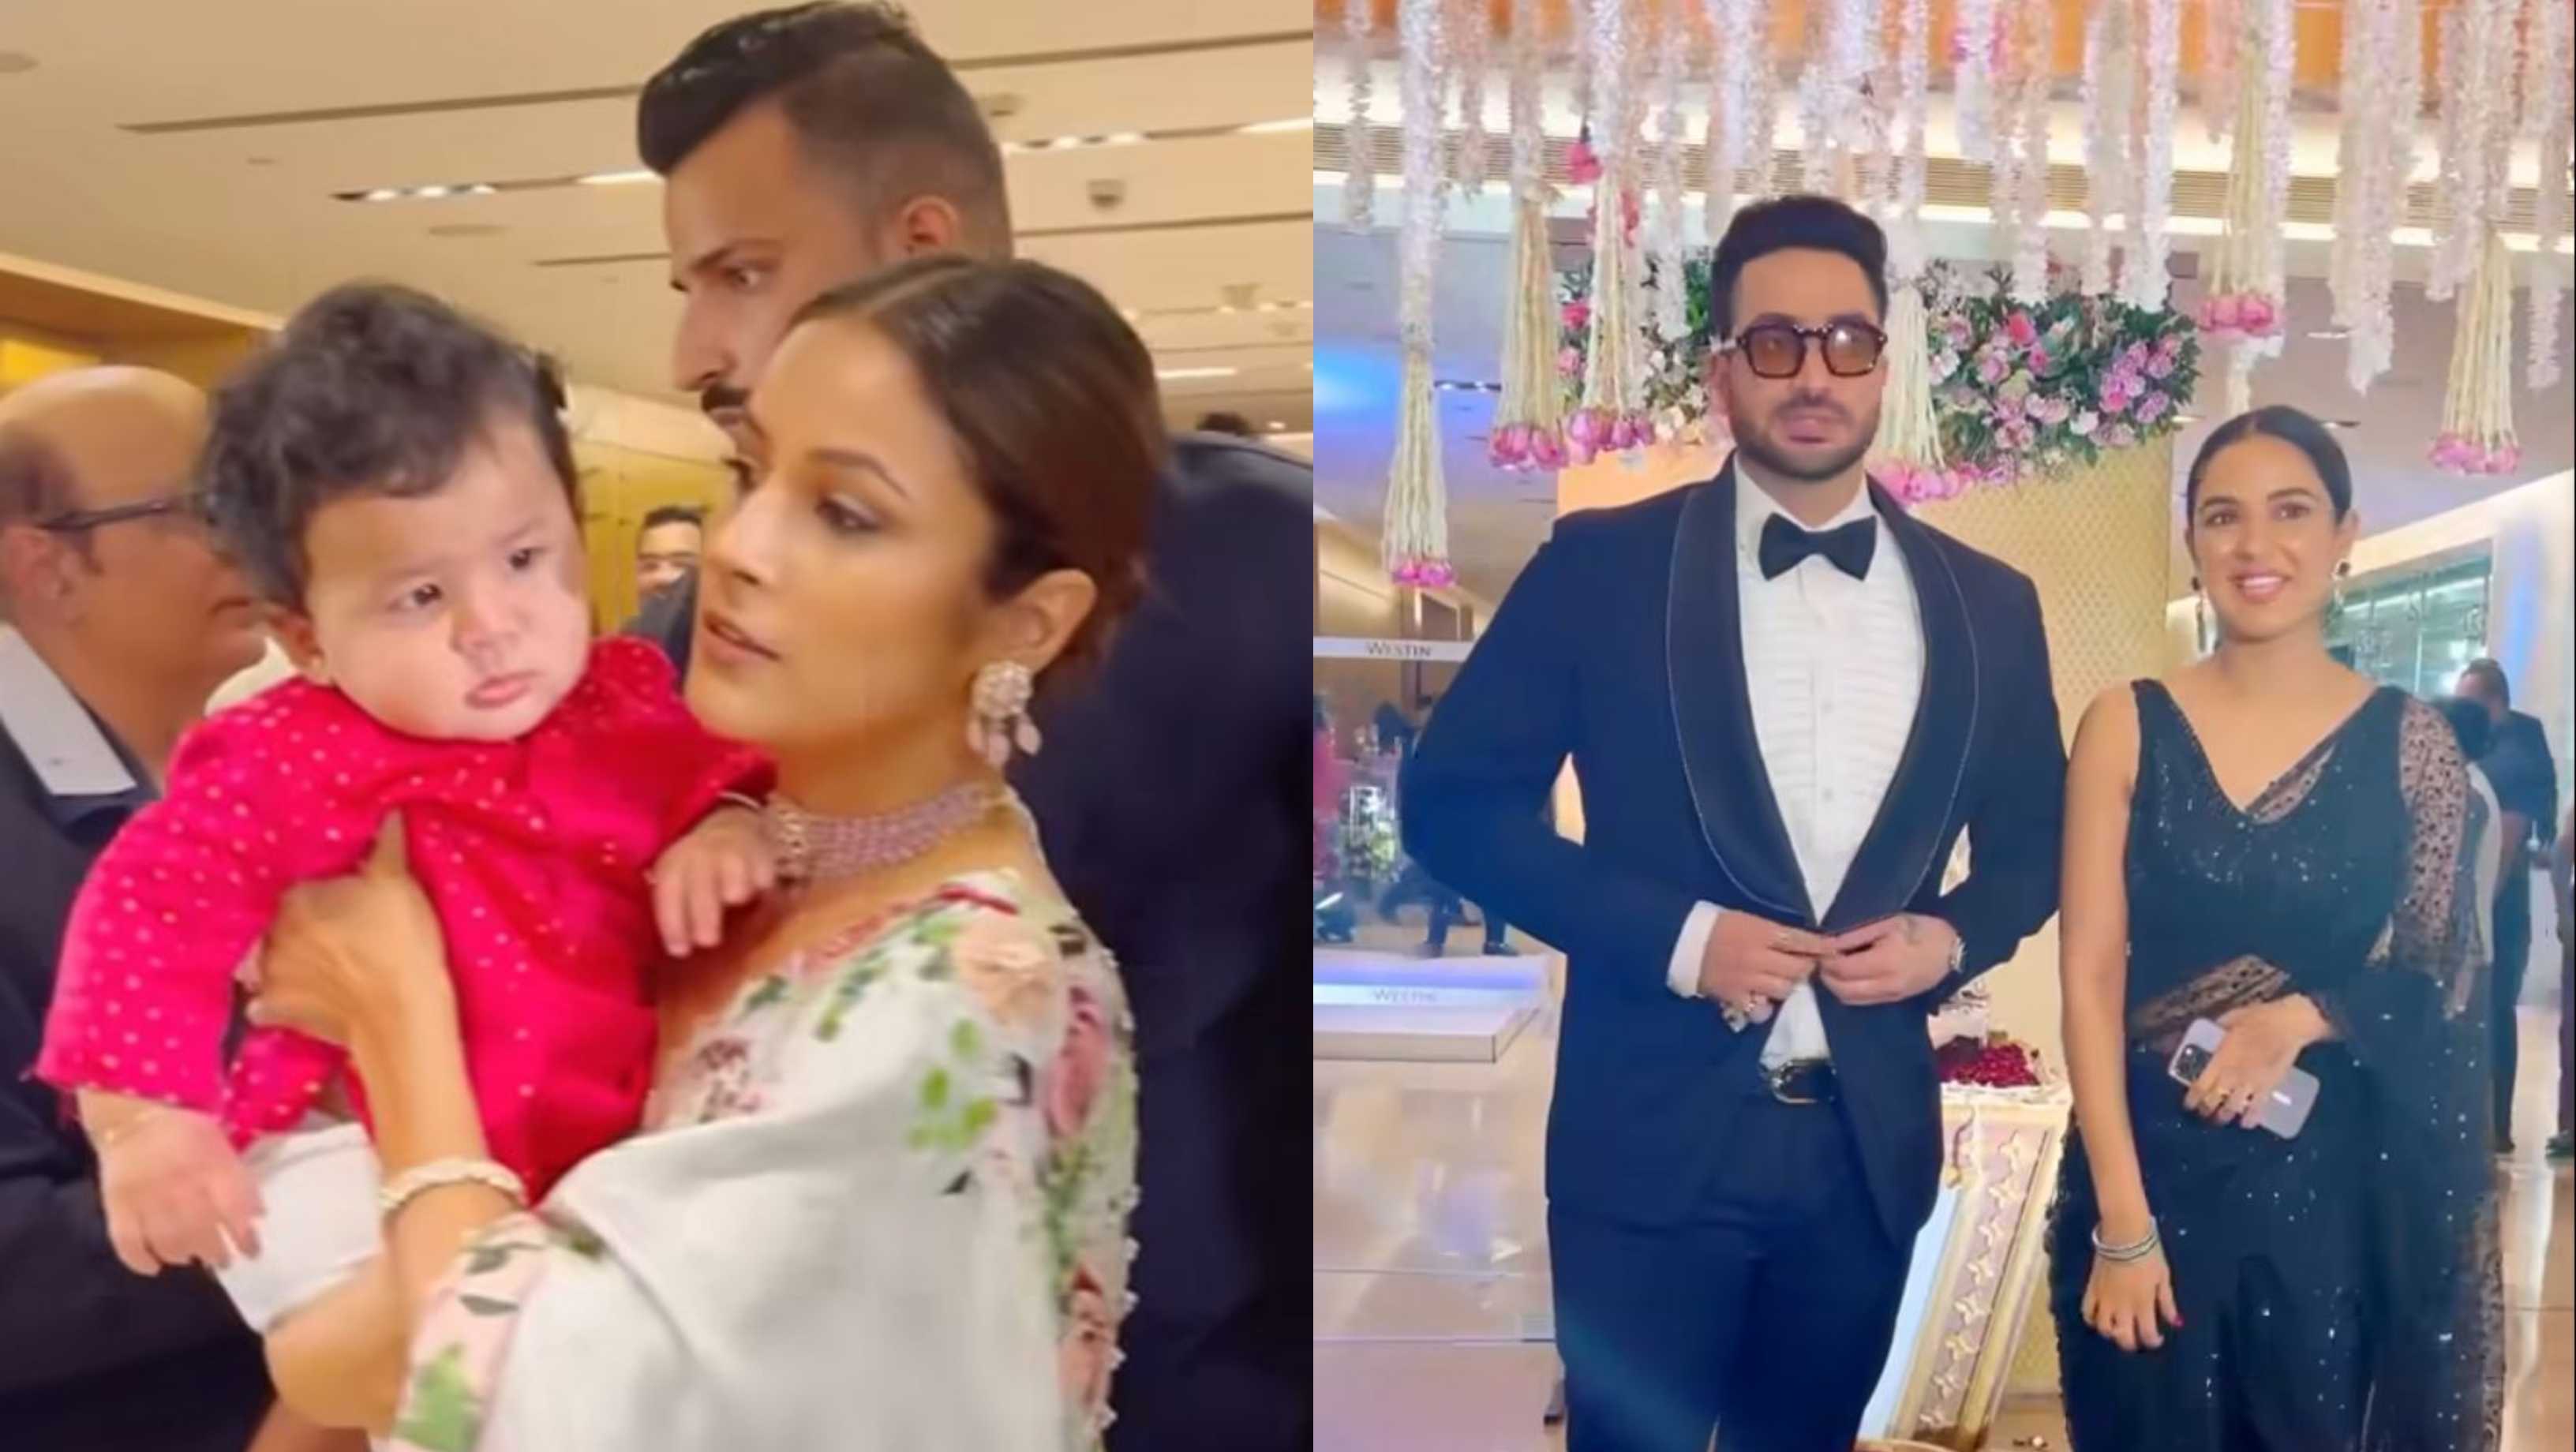 Shehnaaz Gill and Bharti Singh’s son are inseparable at a wedding; Aly Gony and Jasmin Bhasin twin in black